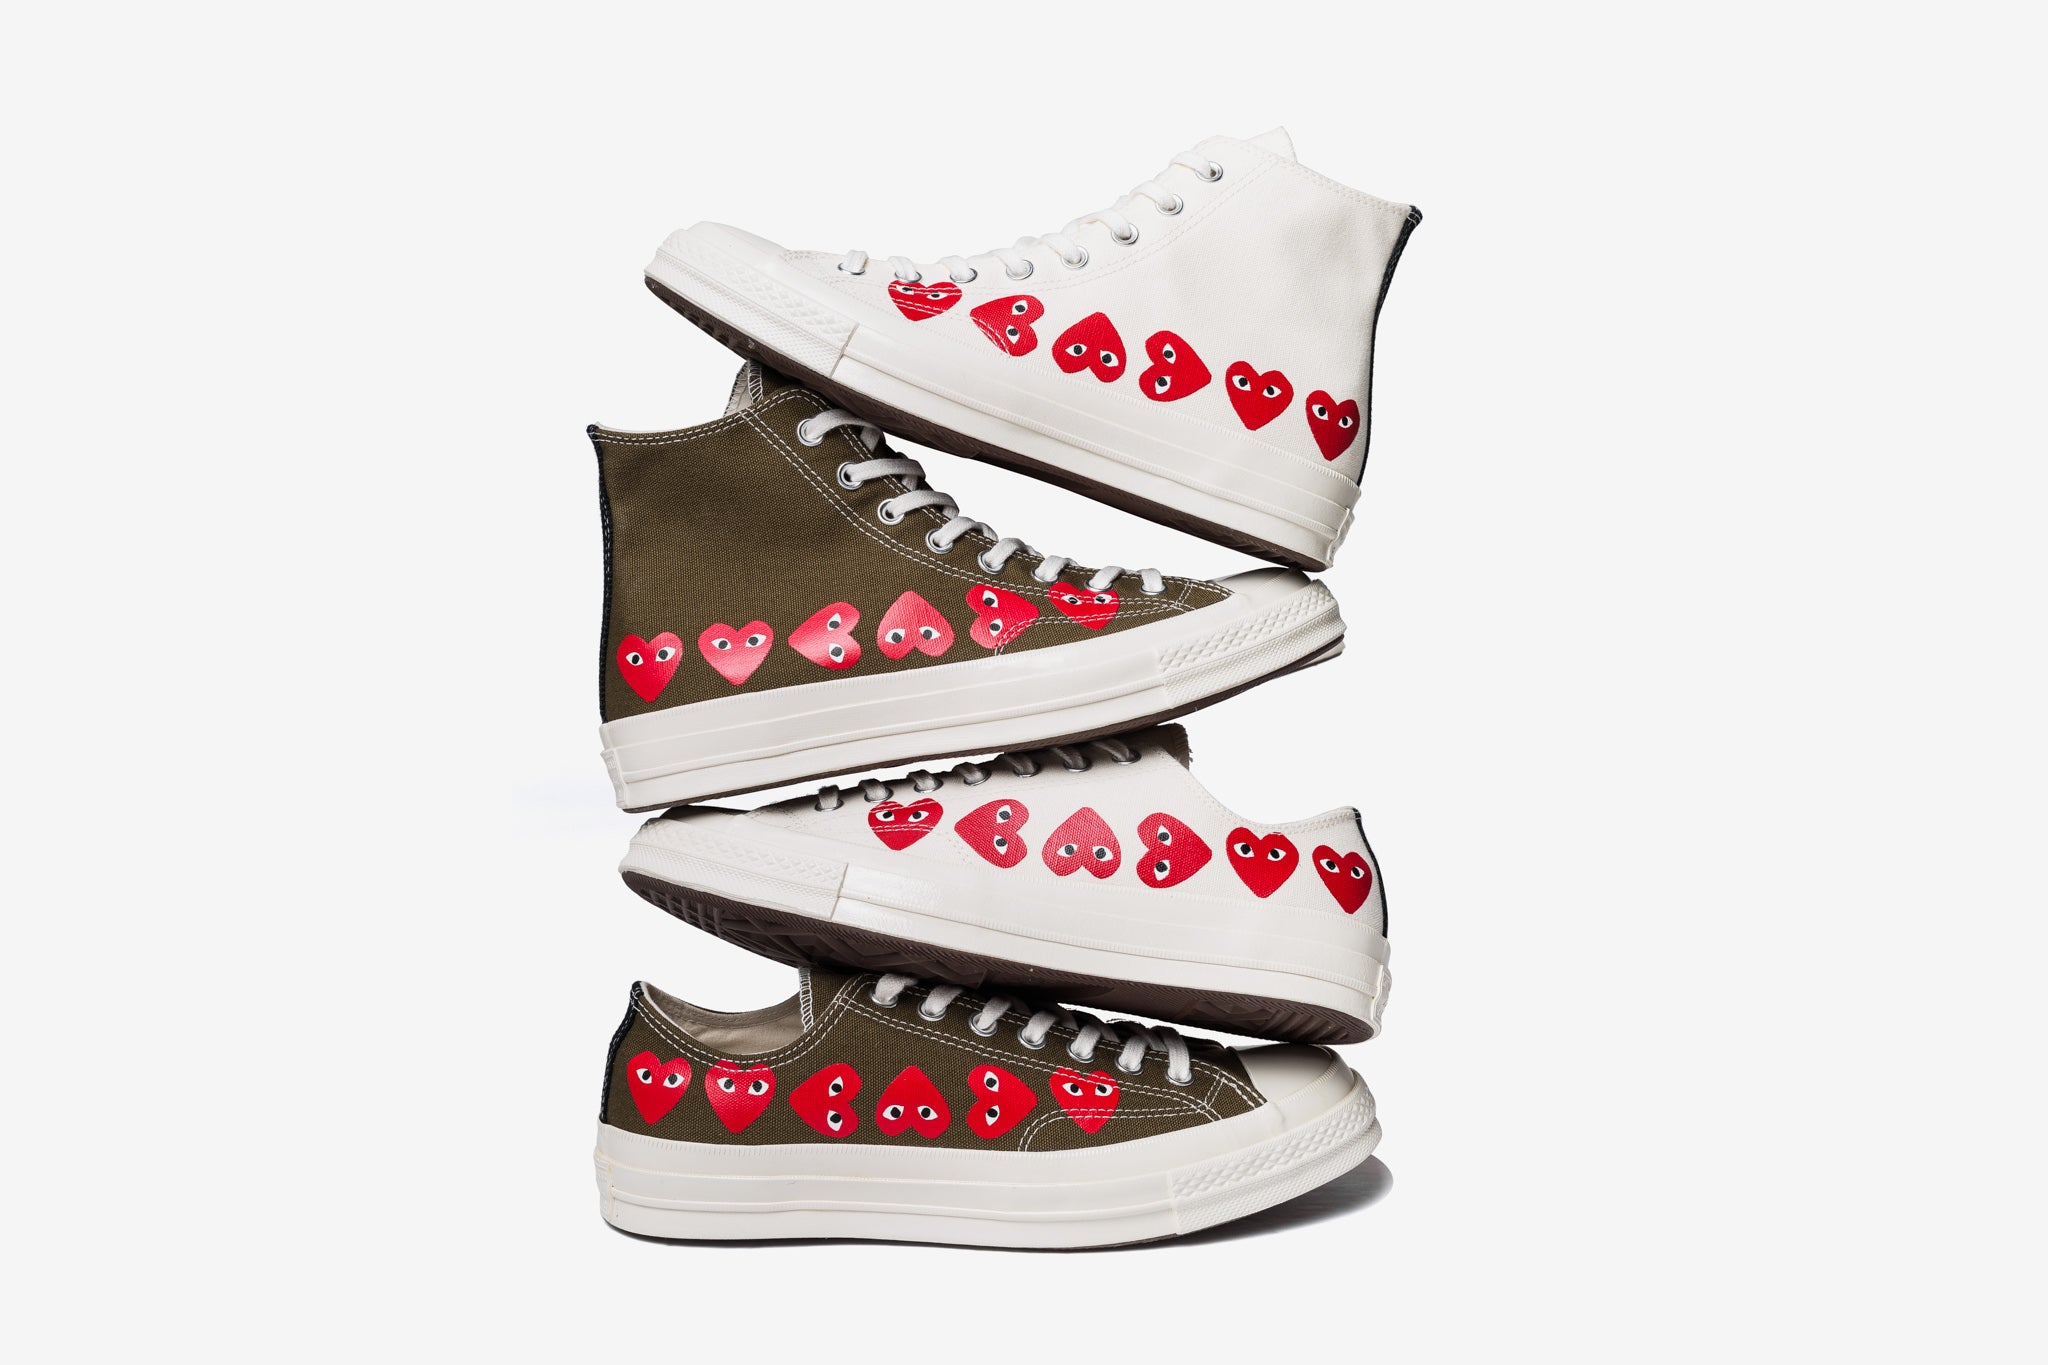 Converse x CDG PLAY Chuck Taylor '70s Collection 02.23.19 – Capsule